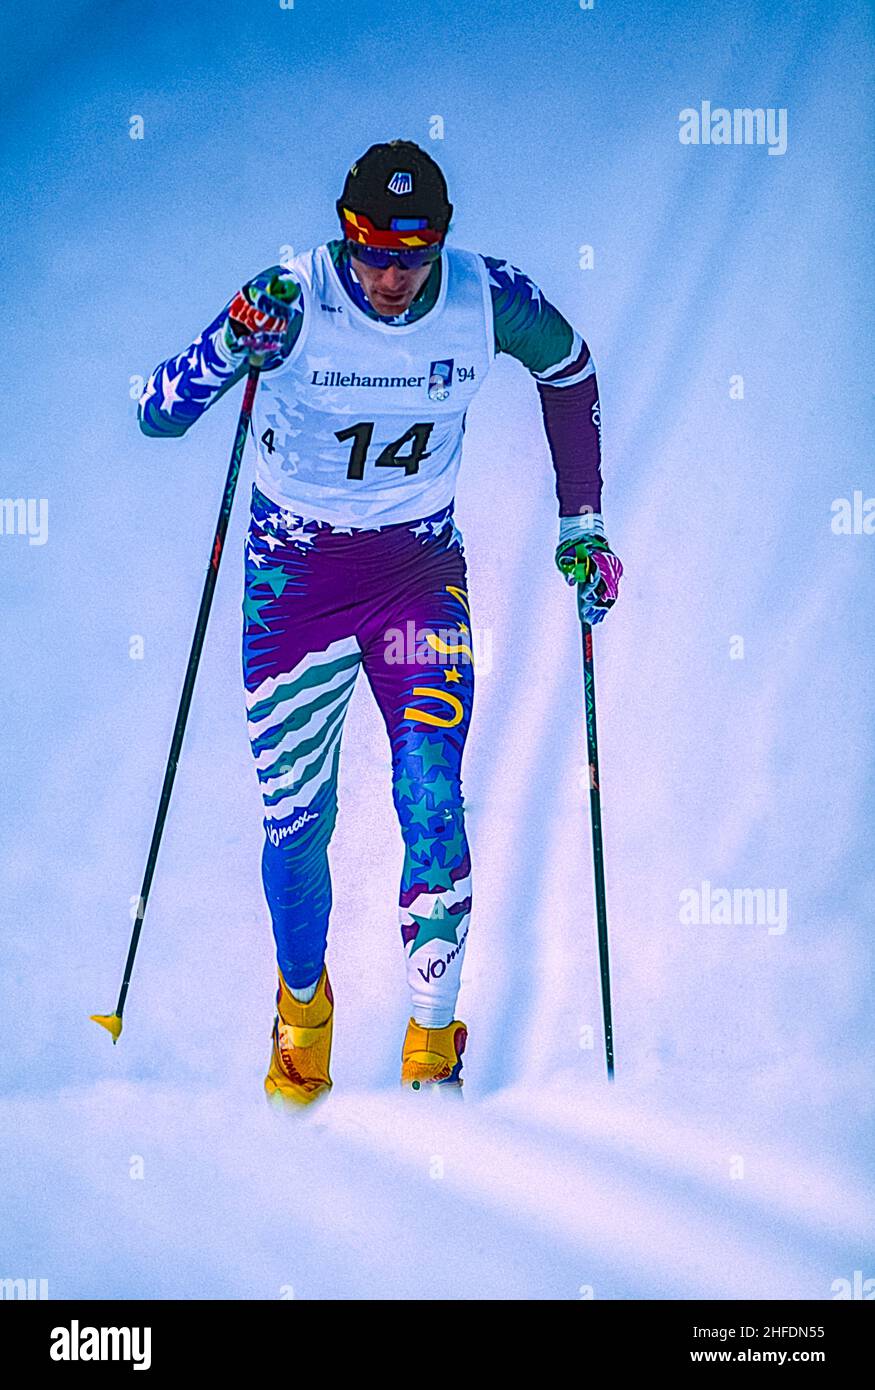 Todd Boonstra (USA) competing in the men's 10km cross country skiing at the 1994 Olympic Winter Games. Stock Photo